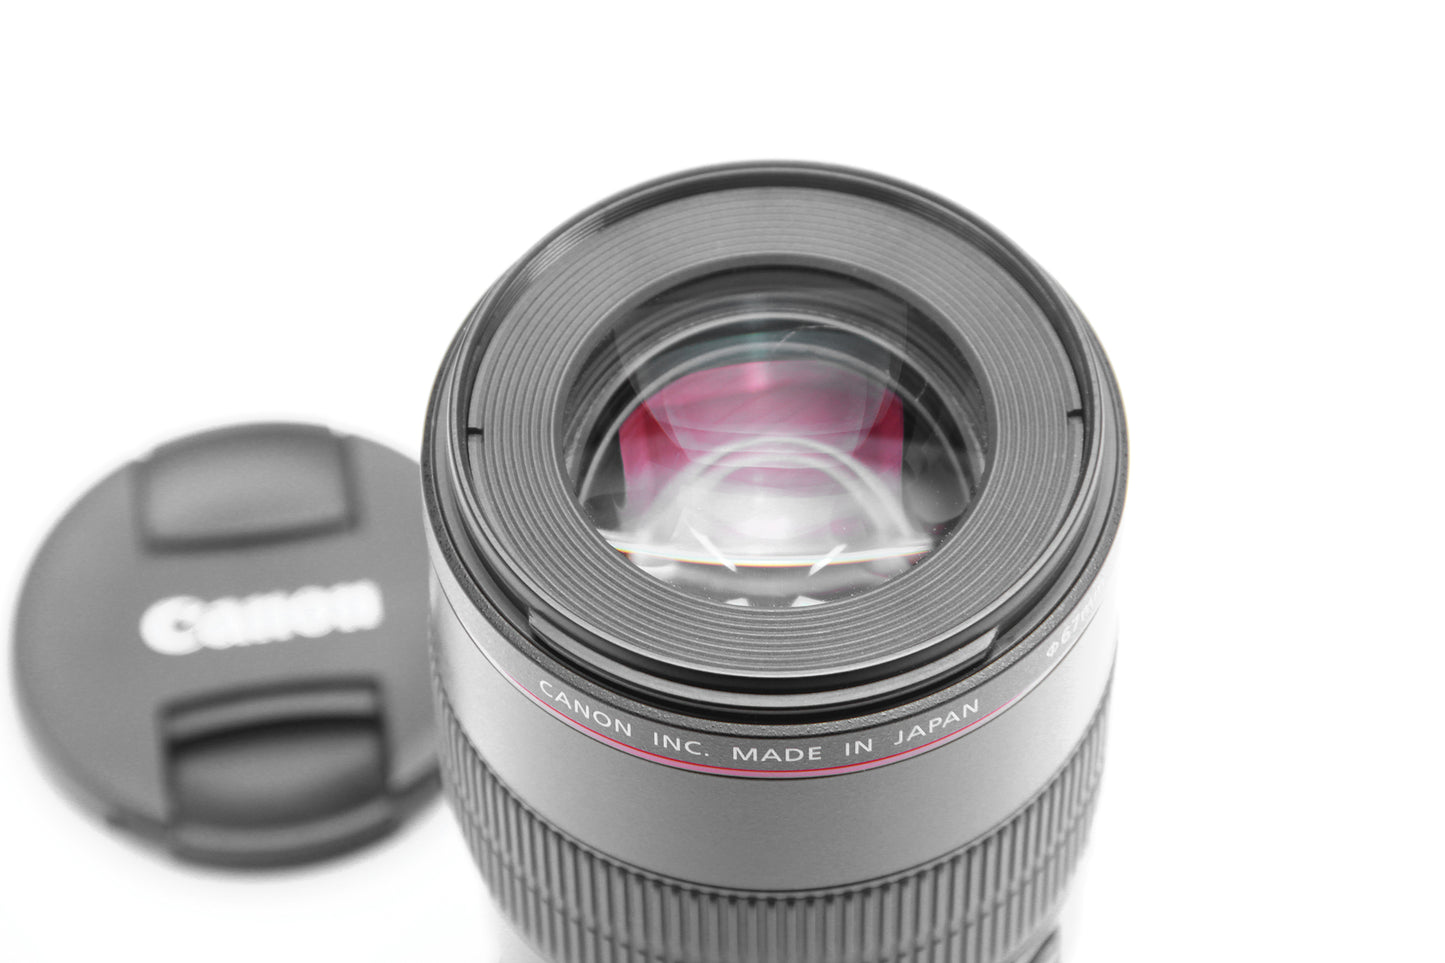 Used Canon 100mm USM IS  F/2.8 L Macro Lens